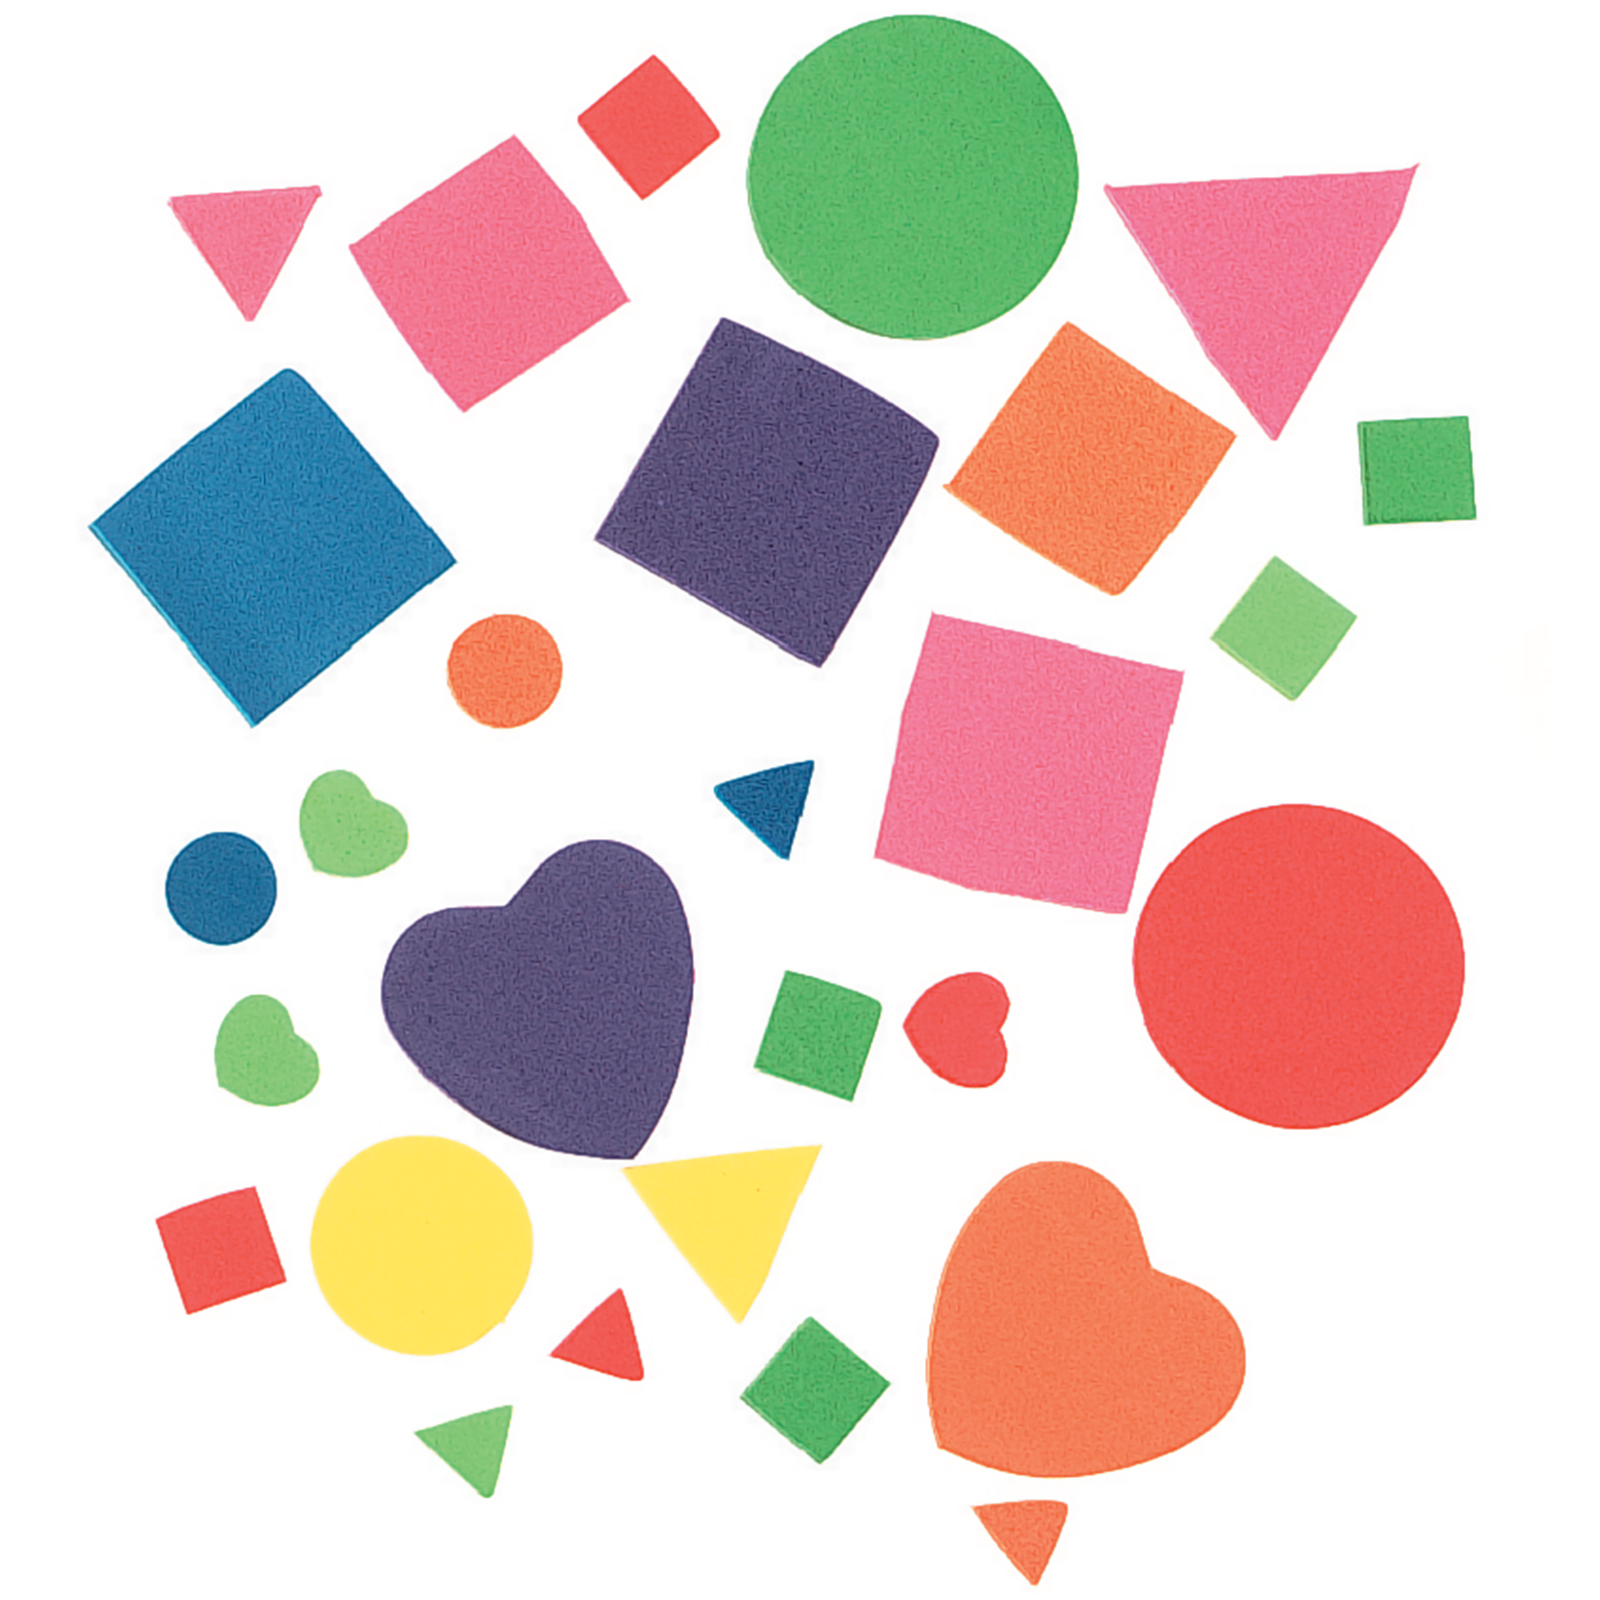 shapes clipart colorful